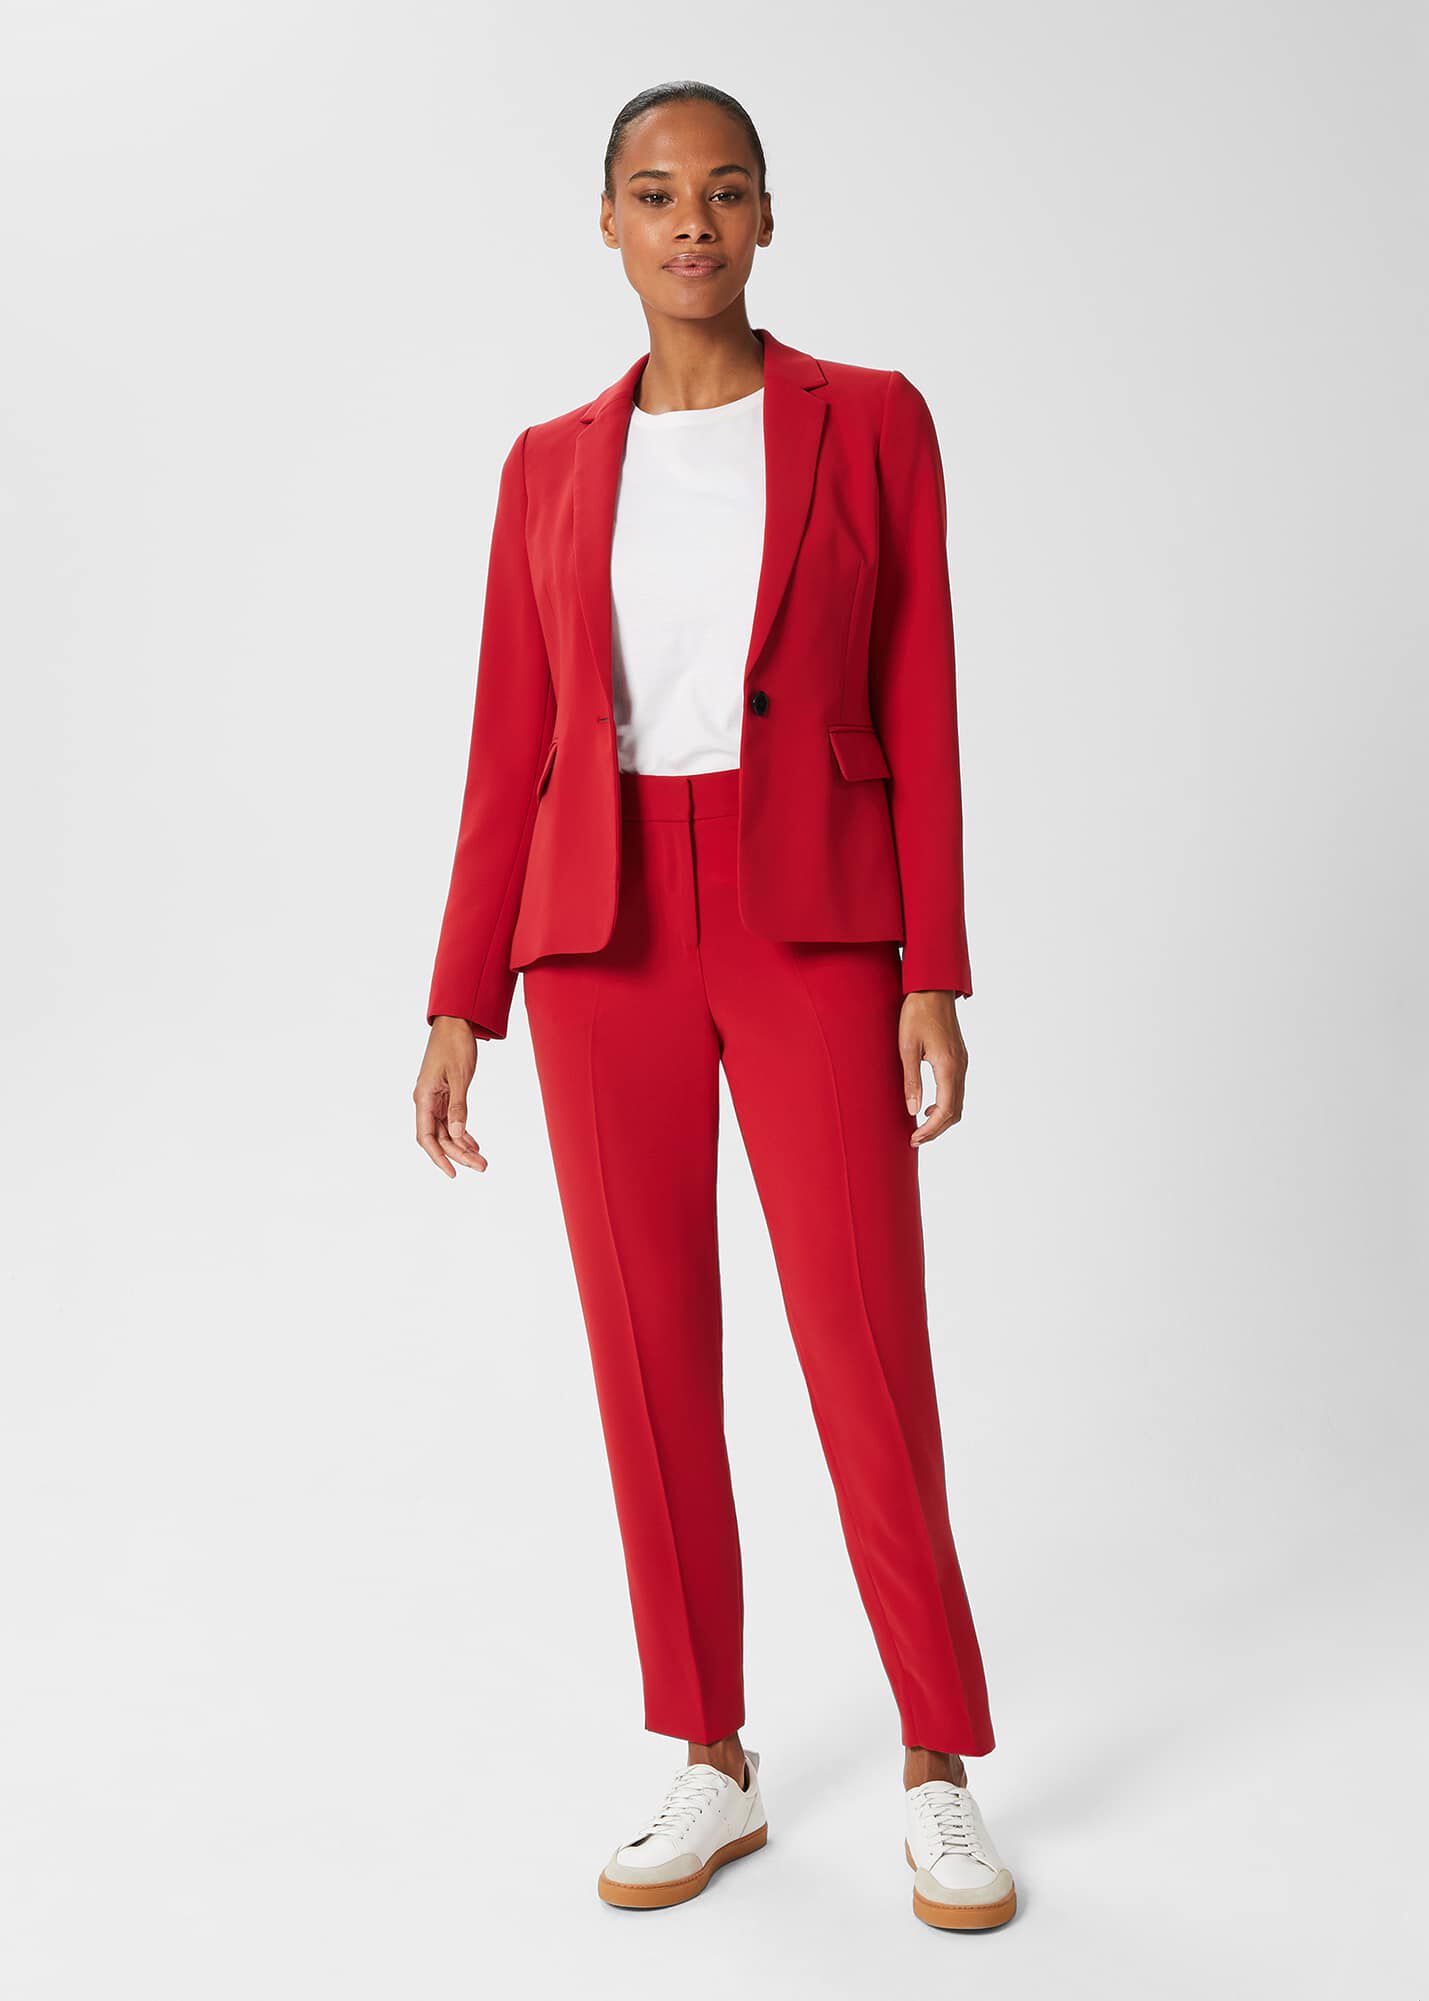 Top more than 76 womens trouser suits zara super hot - in.cdgdbentre